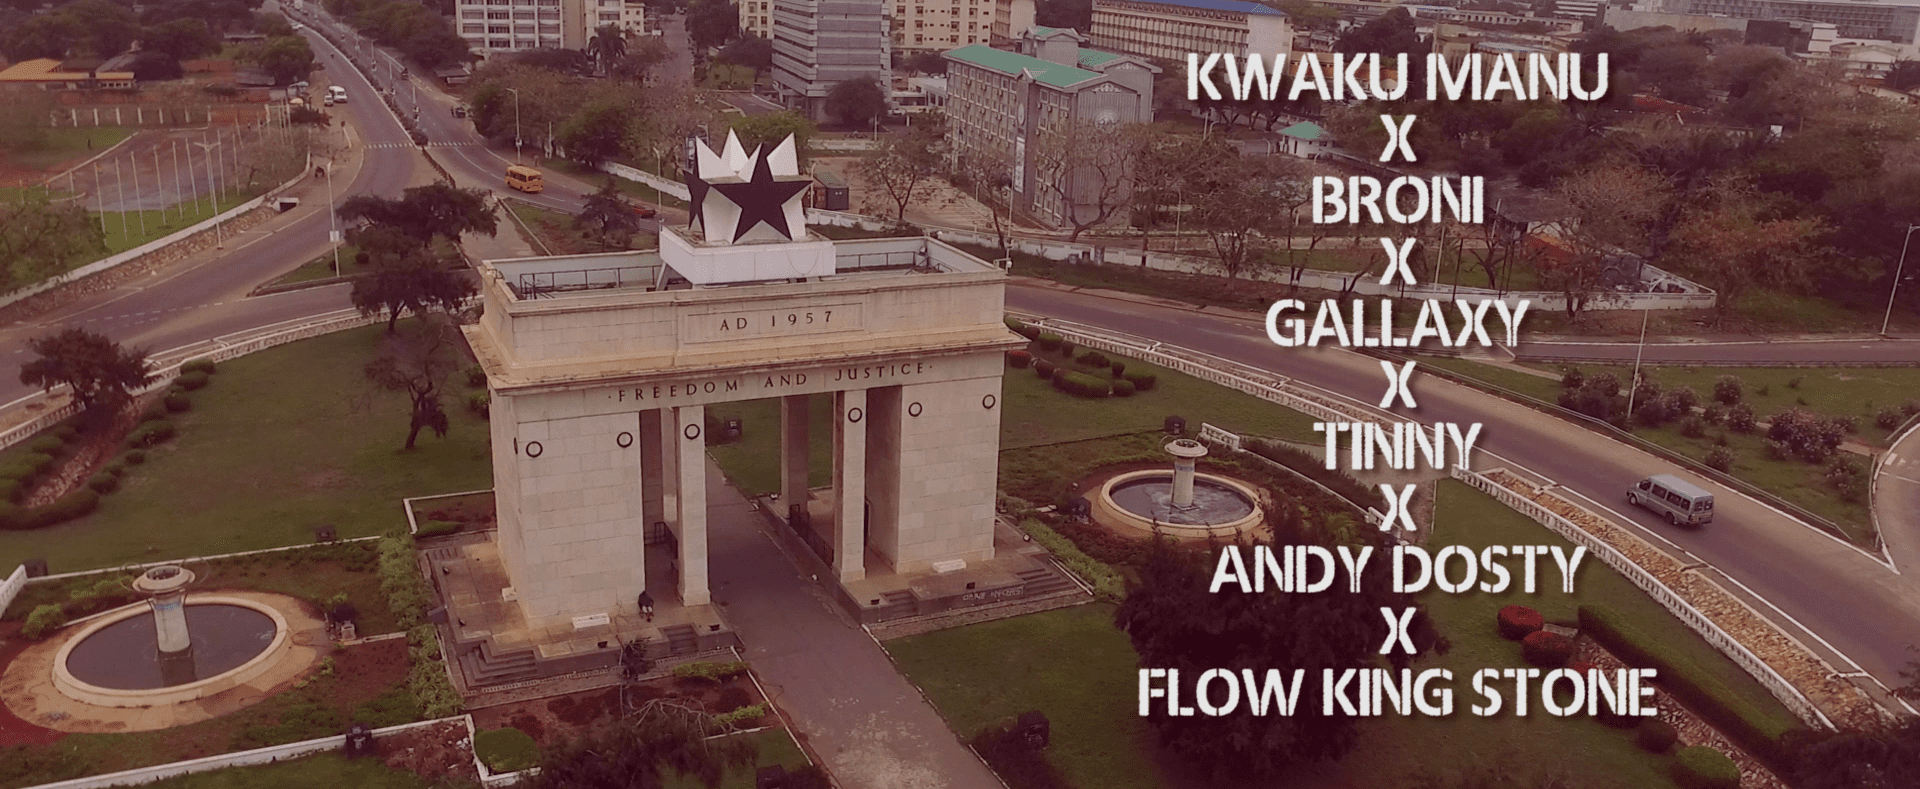 Video: ‘Harbour City Peace Project’ featuring Kwaku Manu,Gallaxy,Broni,Tinny, and others.